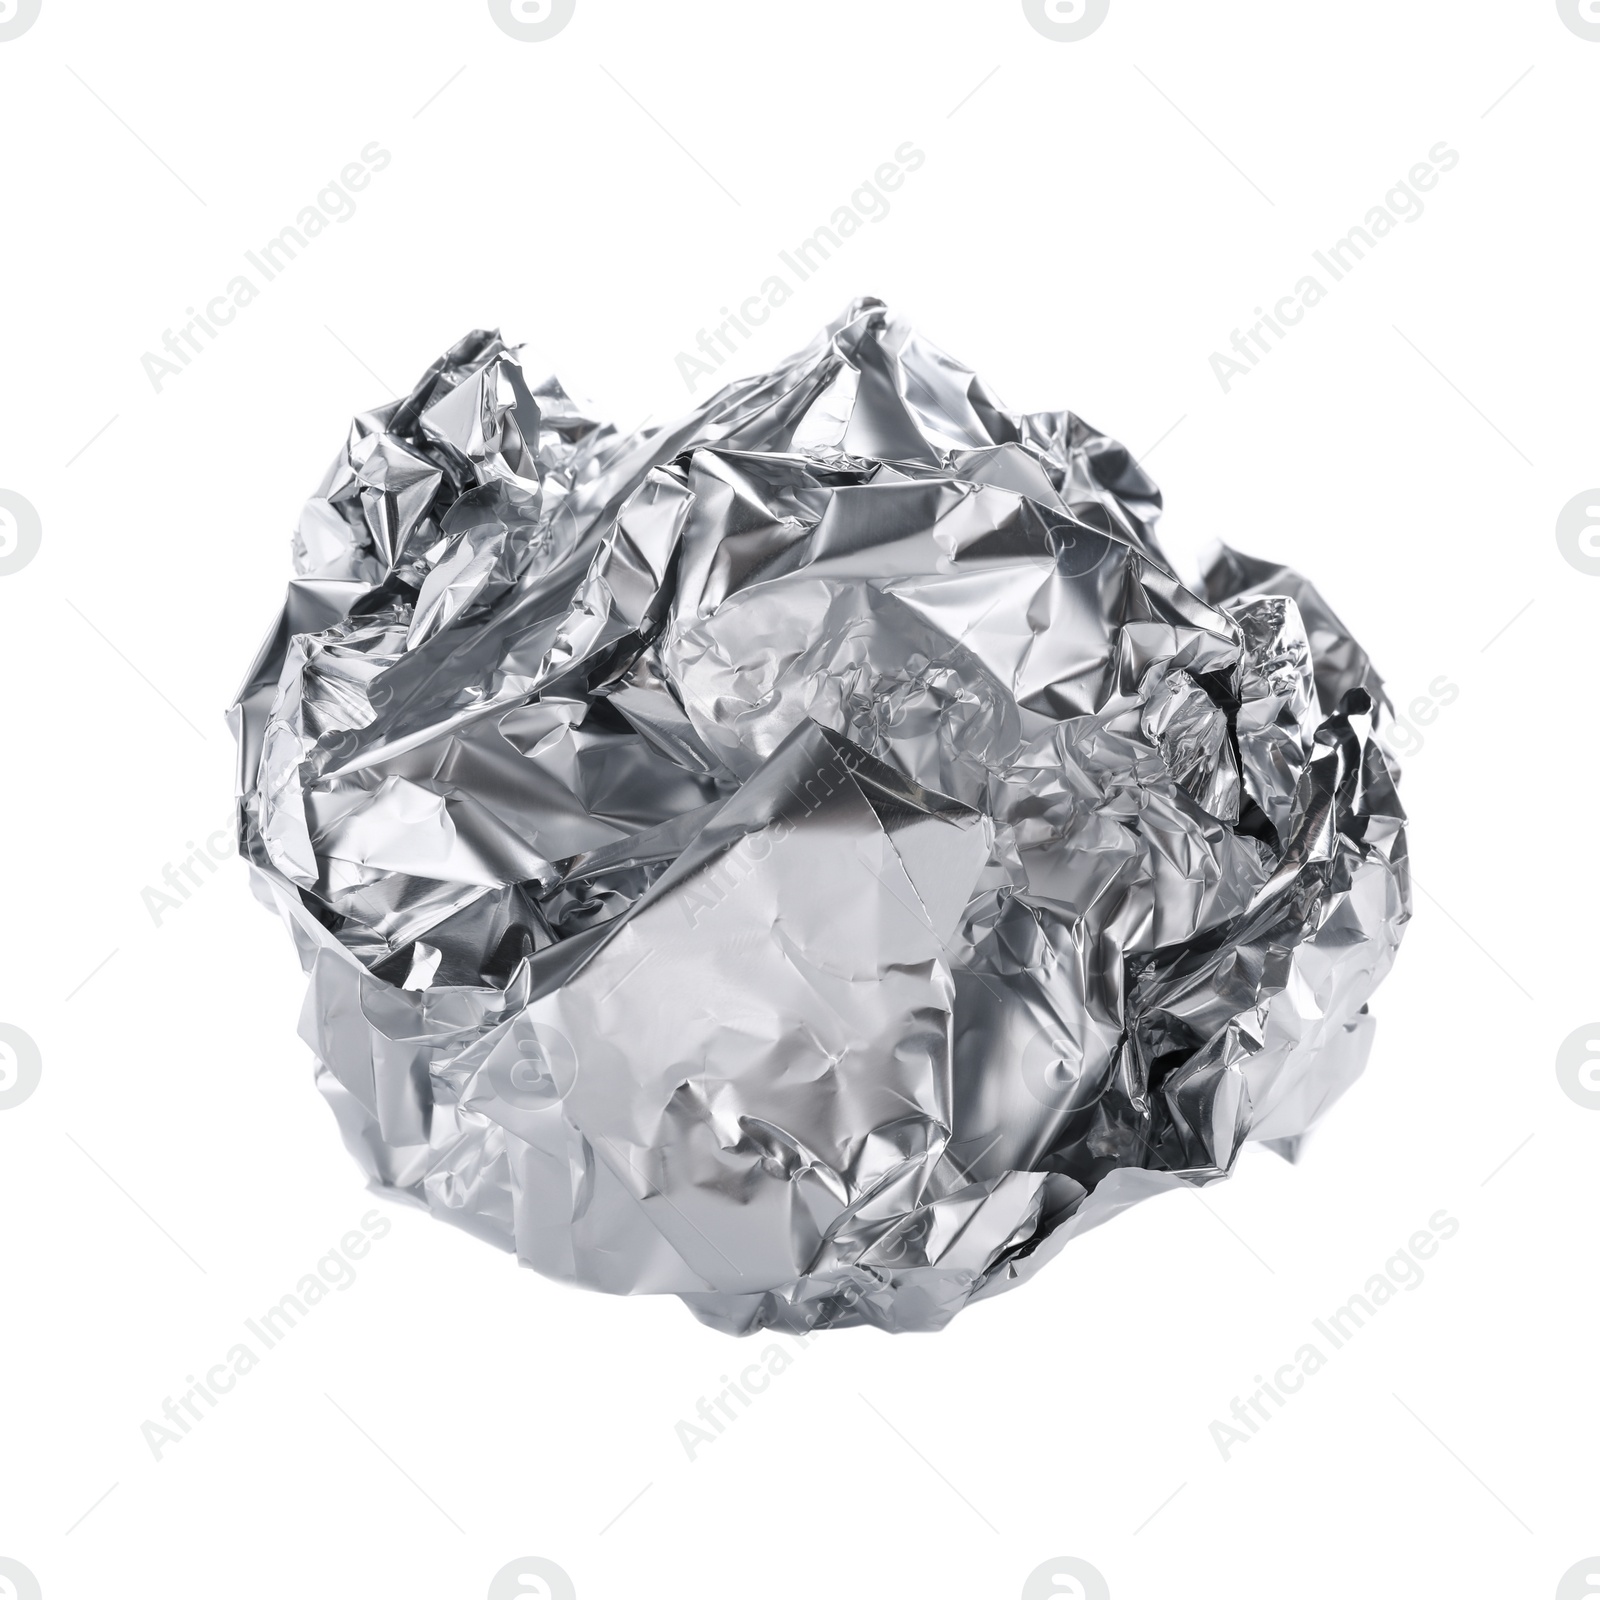 Photo of Crumpled ball of aluminum foil isolated on white